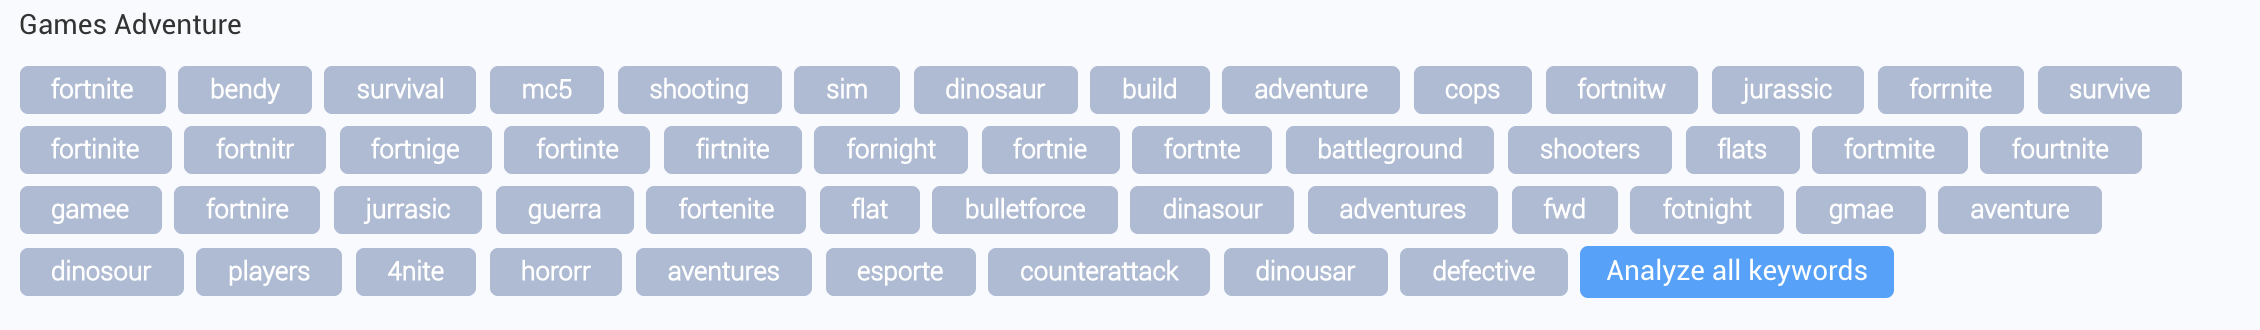 Top category keywords for the Games - Adventure category (iOS US)